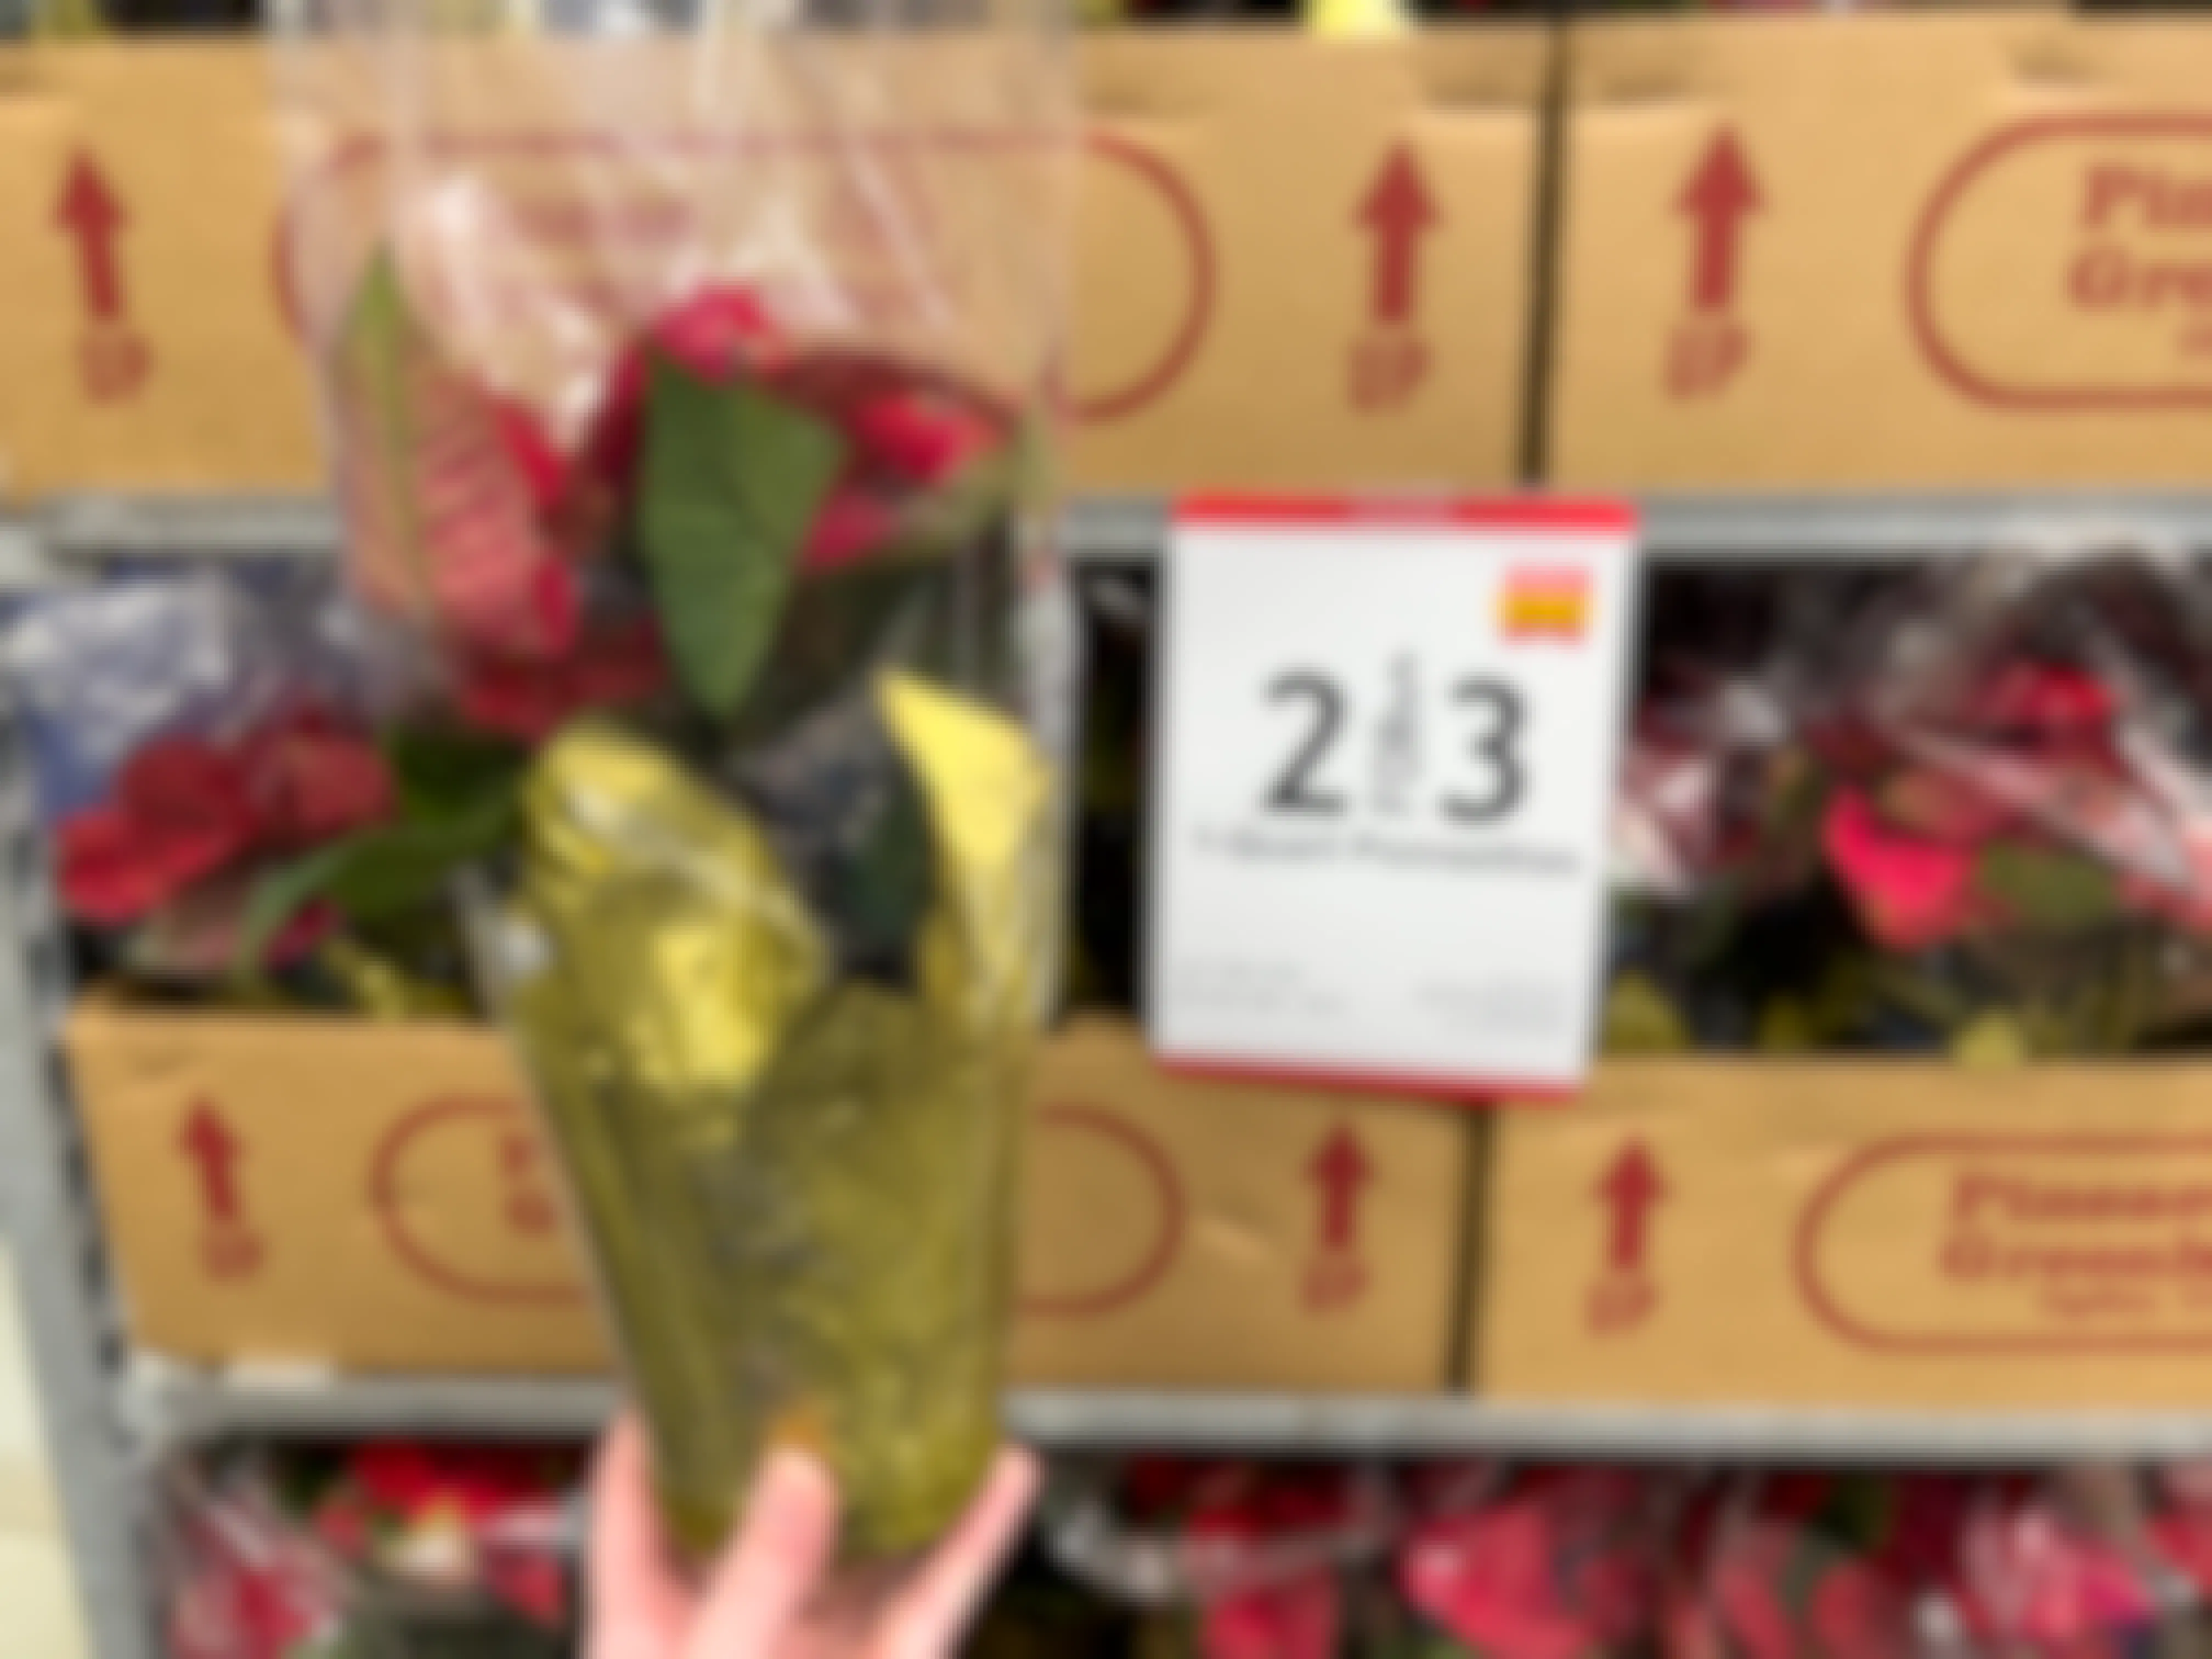 A Poinsettia held next to a sales sign indicating 2 for $3